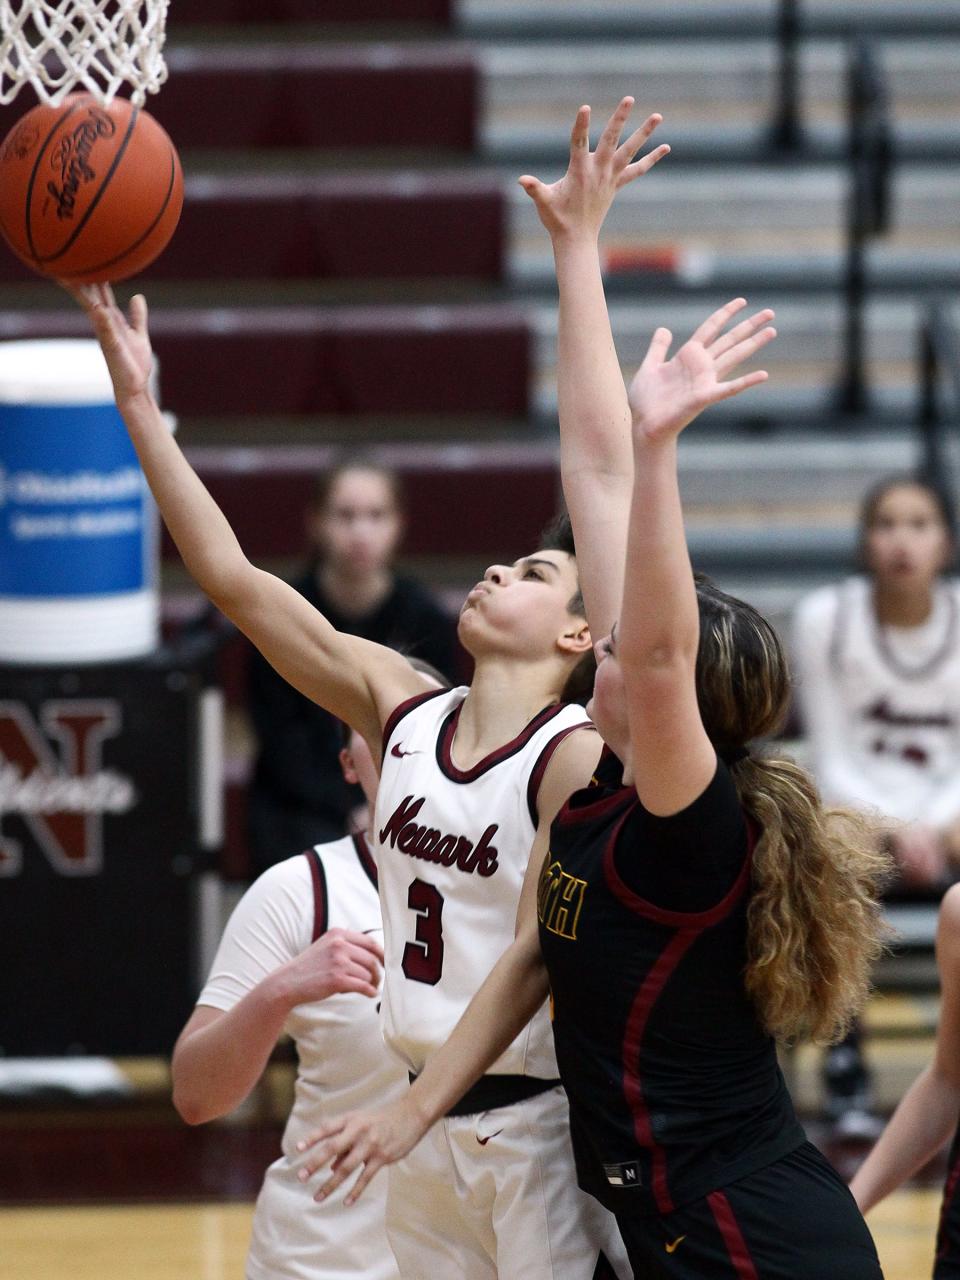 Newark senior Brie Gingras shoots a layup under pressure from Westerville North's Chloe Shockley on Tuesday, Dec. 20, 2022 at Jimmy Allen Gymnasium. The host Wildcats fell 56-49.